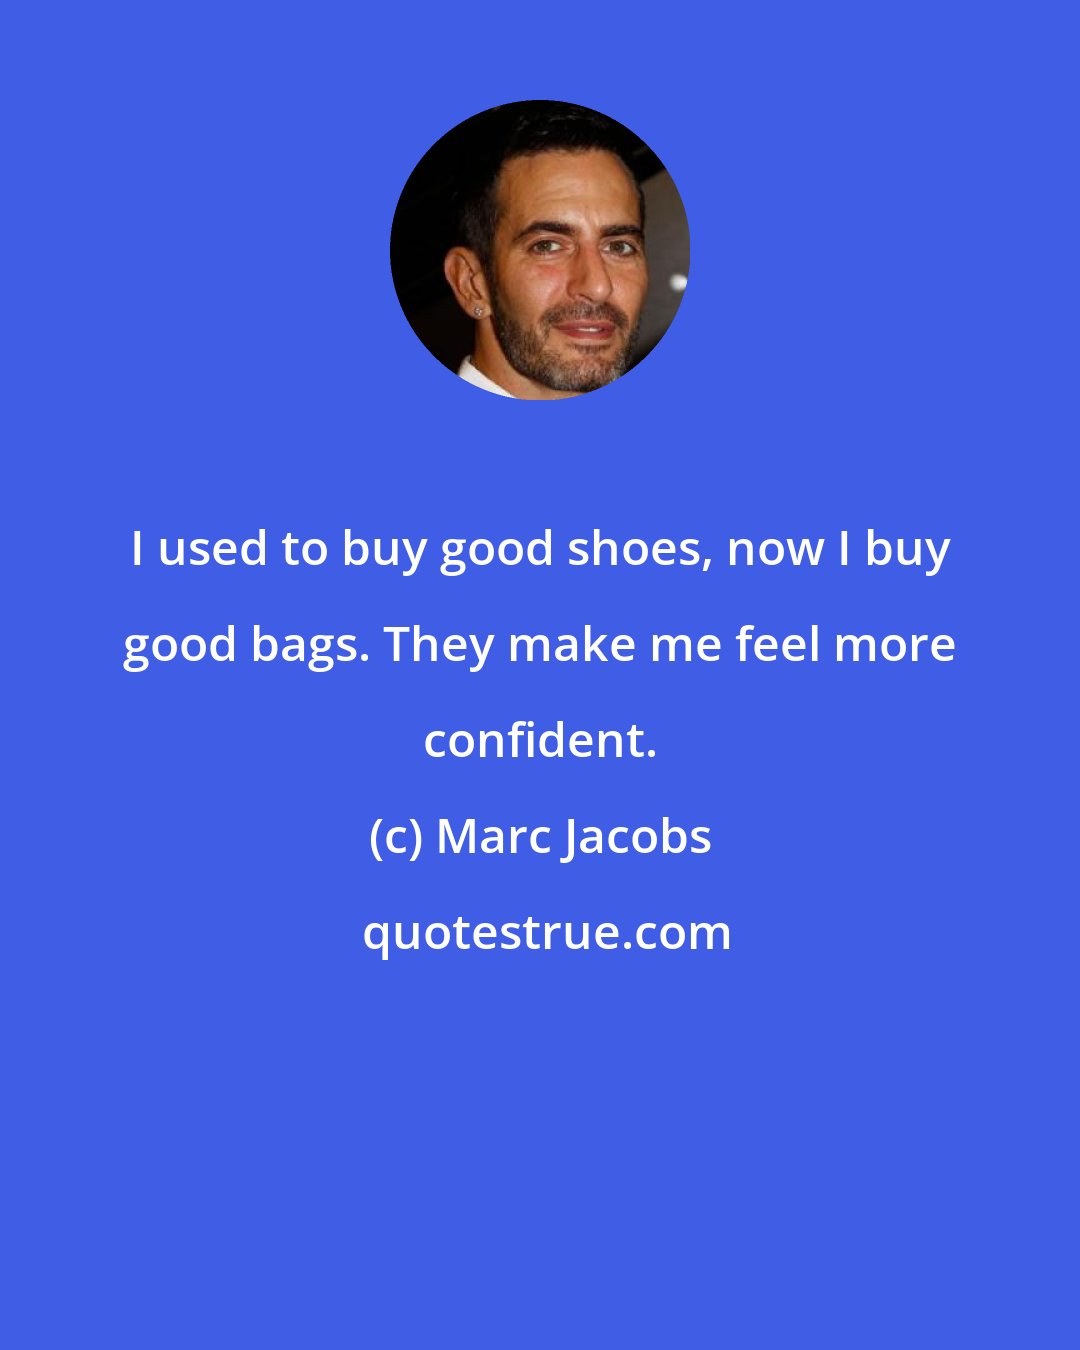 Marc Jacobs: I used to buy good shoes, now I buy good bags. They make me feel more confident.